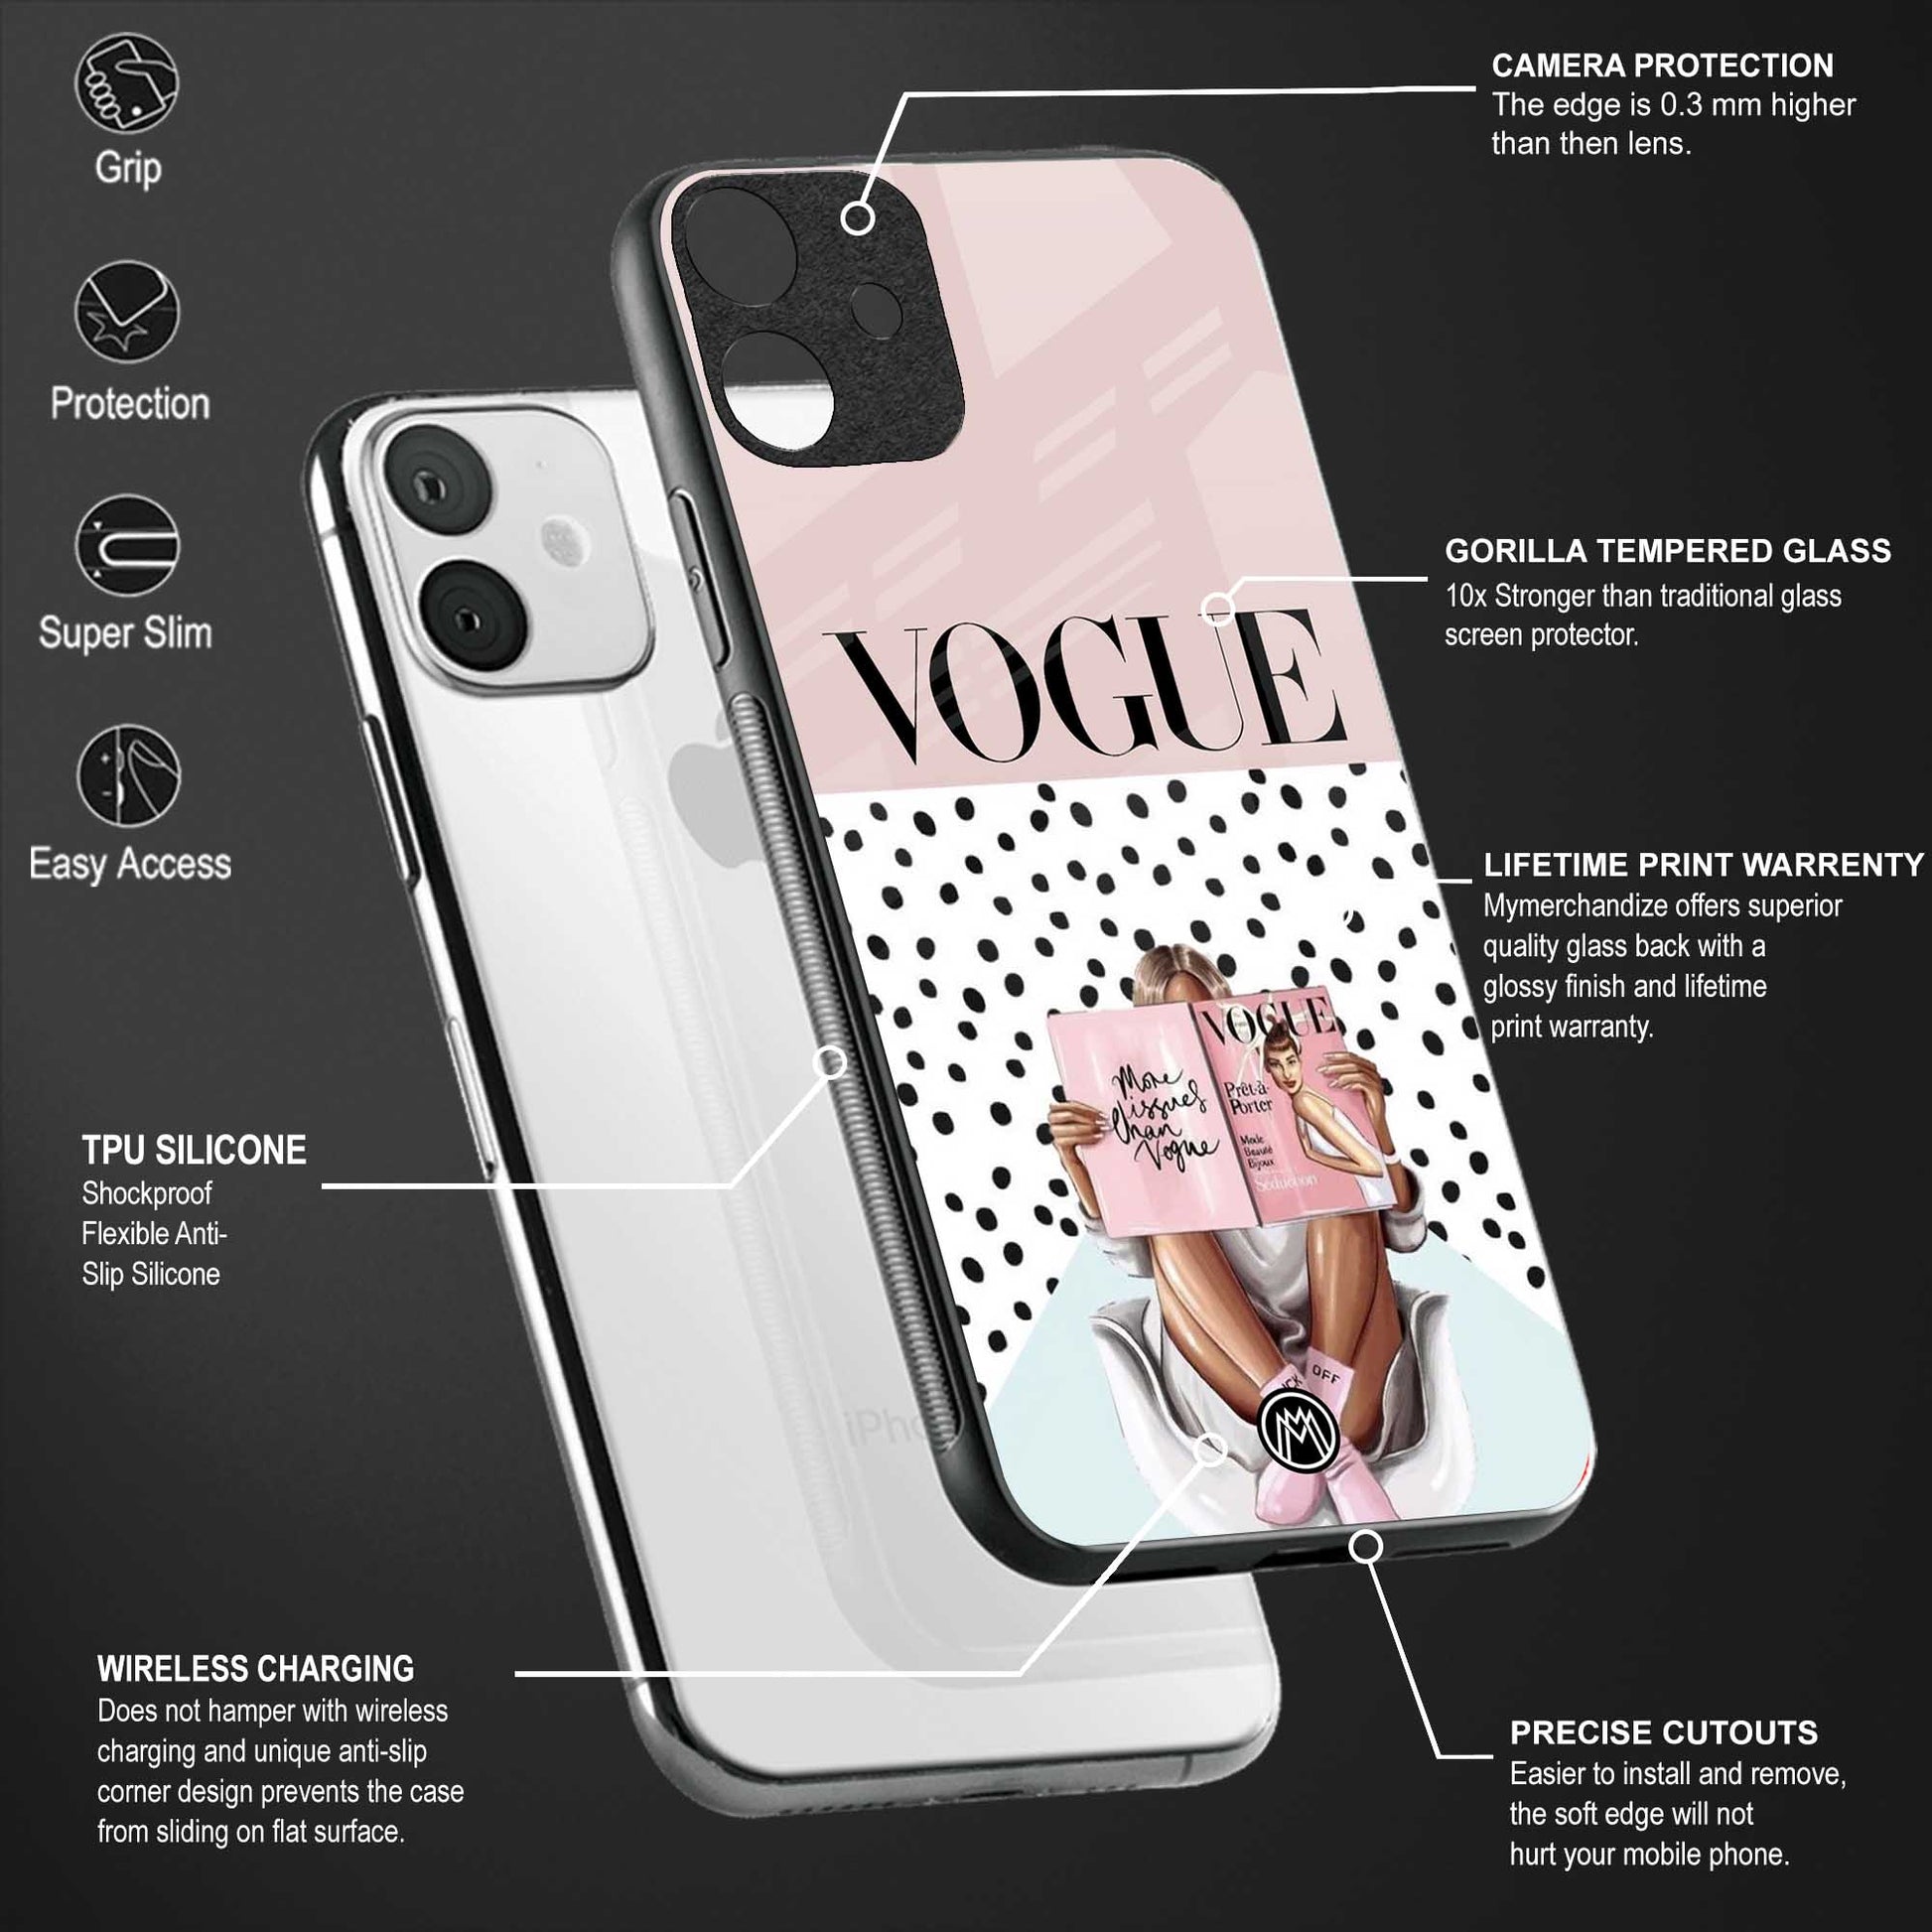 vogue queen glass case for iphone xr image-4